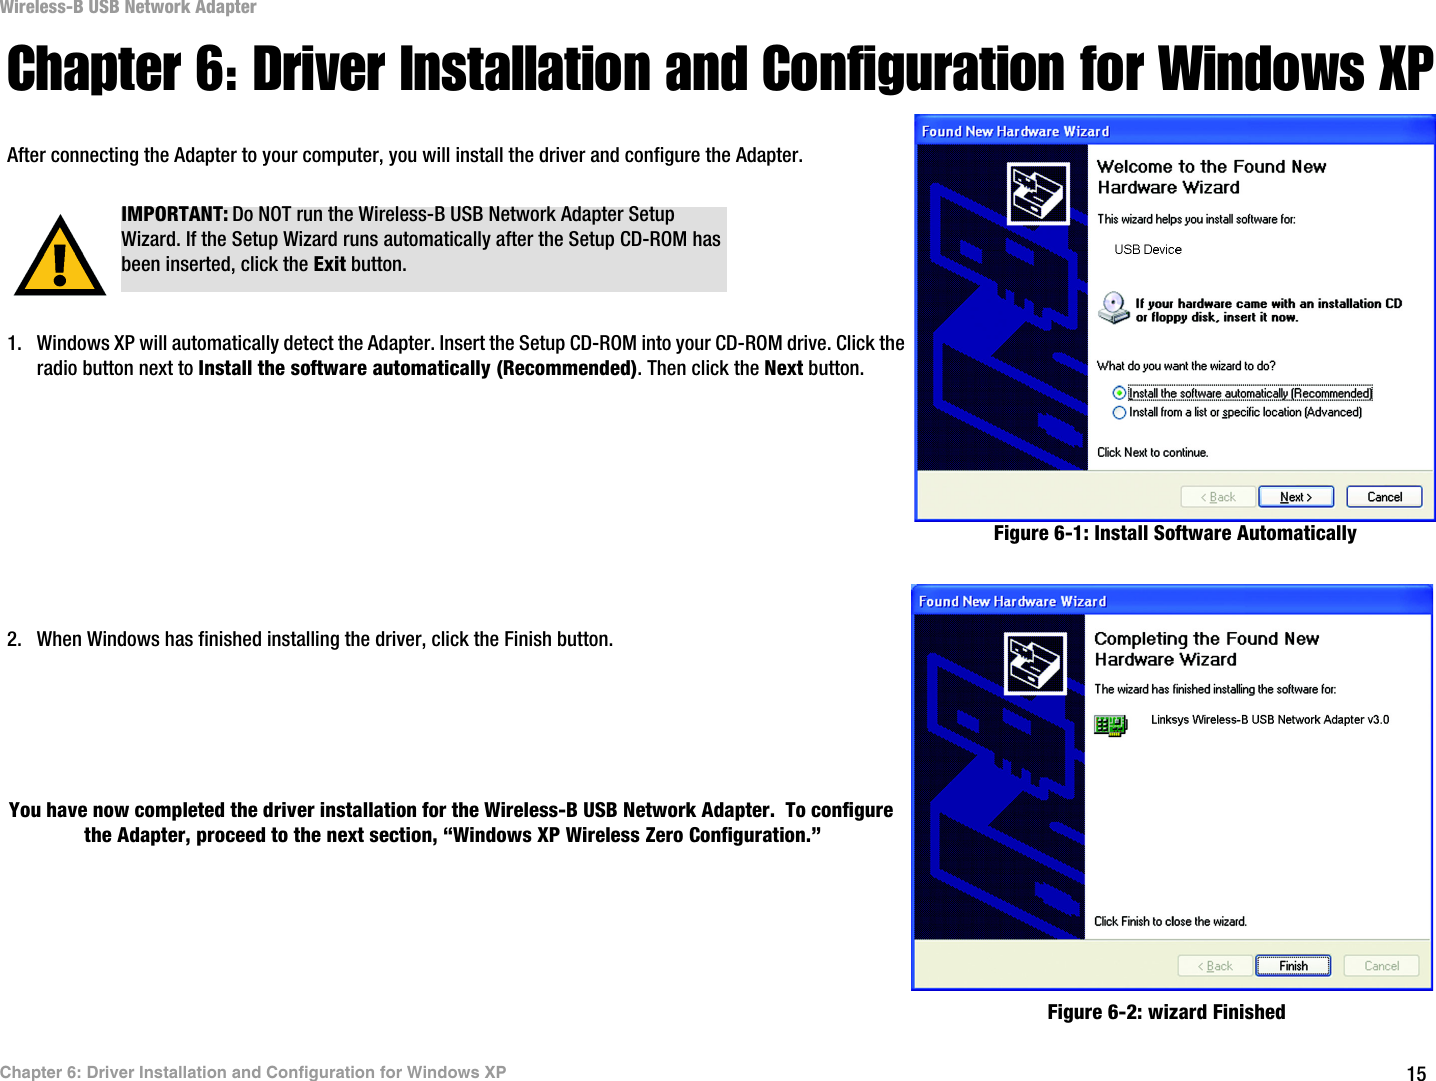 15Chapter 6: Driver Installation and Configuration for Windows XPWireless-B USB Network AdapterChapter 6: Driver Installation and Configuration for Windows XPAfter connecting the Adapter to your computer, you will install the driver and configure the Adapter.1. Windows XP will automatically detect the Adapter. Insert the Setup CD-ROM into your CD-ROM drive. Click the radio button next to Install the software automatically (Recommended). Then click the Next button.2. When Windows has finished installing the driver, click the Finish button.You have now completed the driver installation for the Wireless-B USB Network Adapter.  To configure the Adapter, proceed to the next section, “Windows XP Wireless Zero Configuration.” IMPORTANT: Do NOT run the Wireless-B USB Network Adapter Setup Wizard. If the Setup Wizard runs automatically after the Setup CD-ROM has been inserted, click the Exit button.Figure 6-1: Install Software AutomaticallyFigure 6-2: wizard Finished